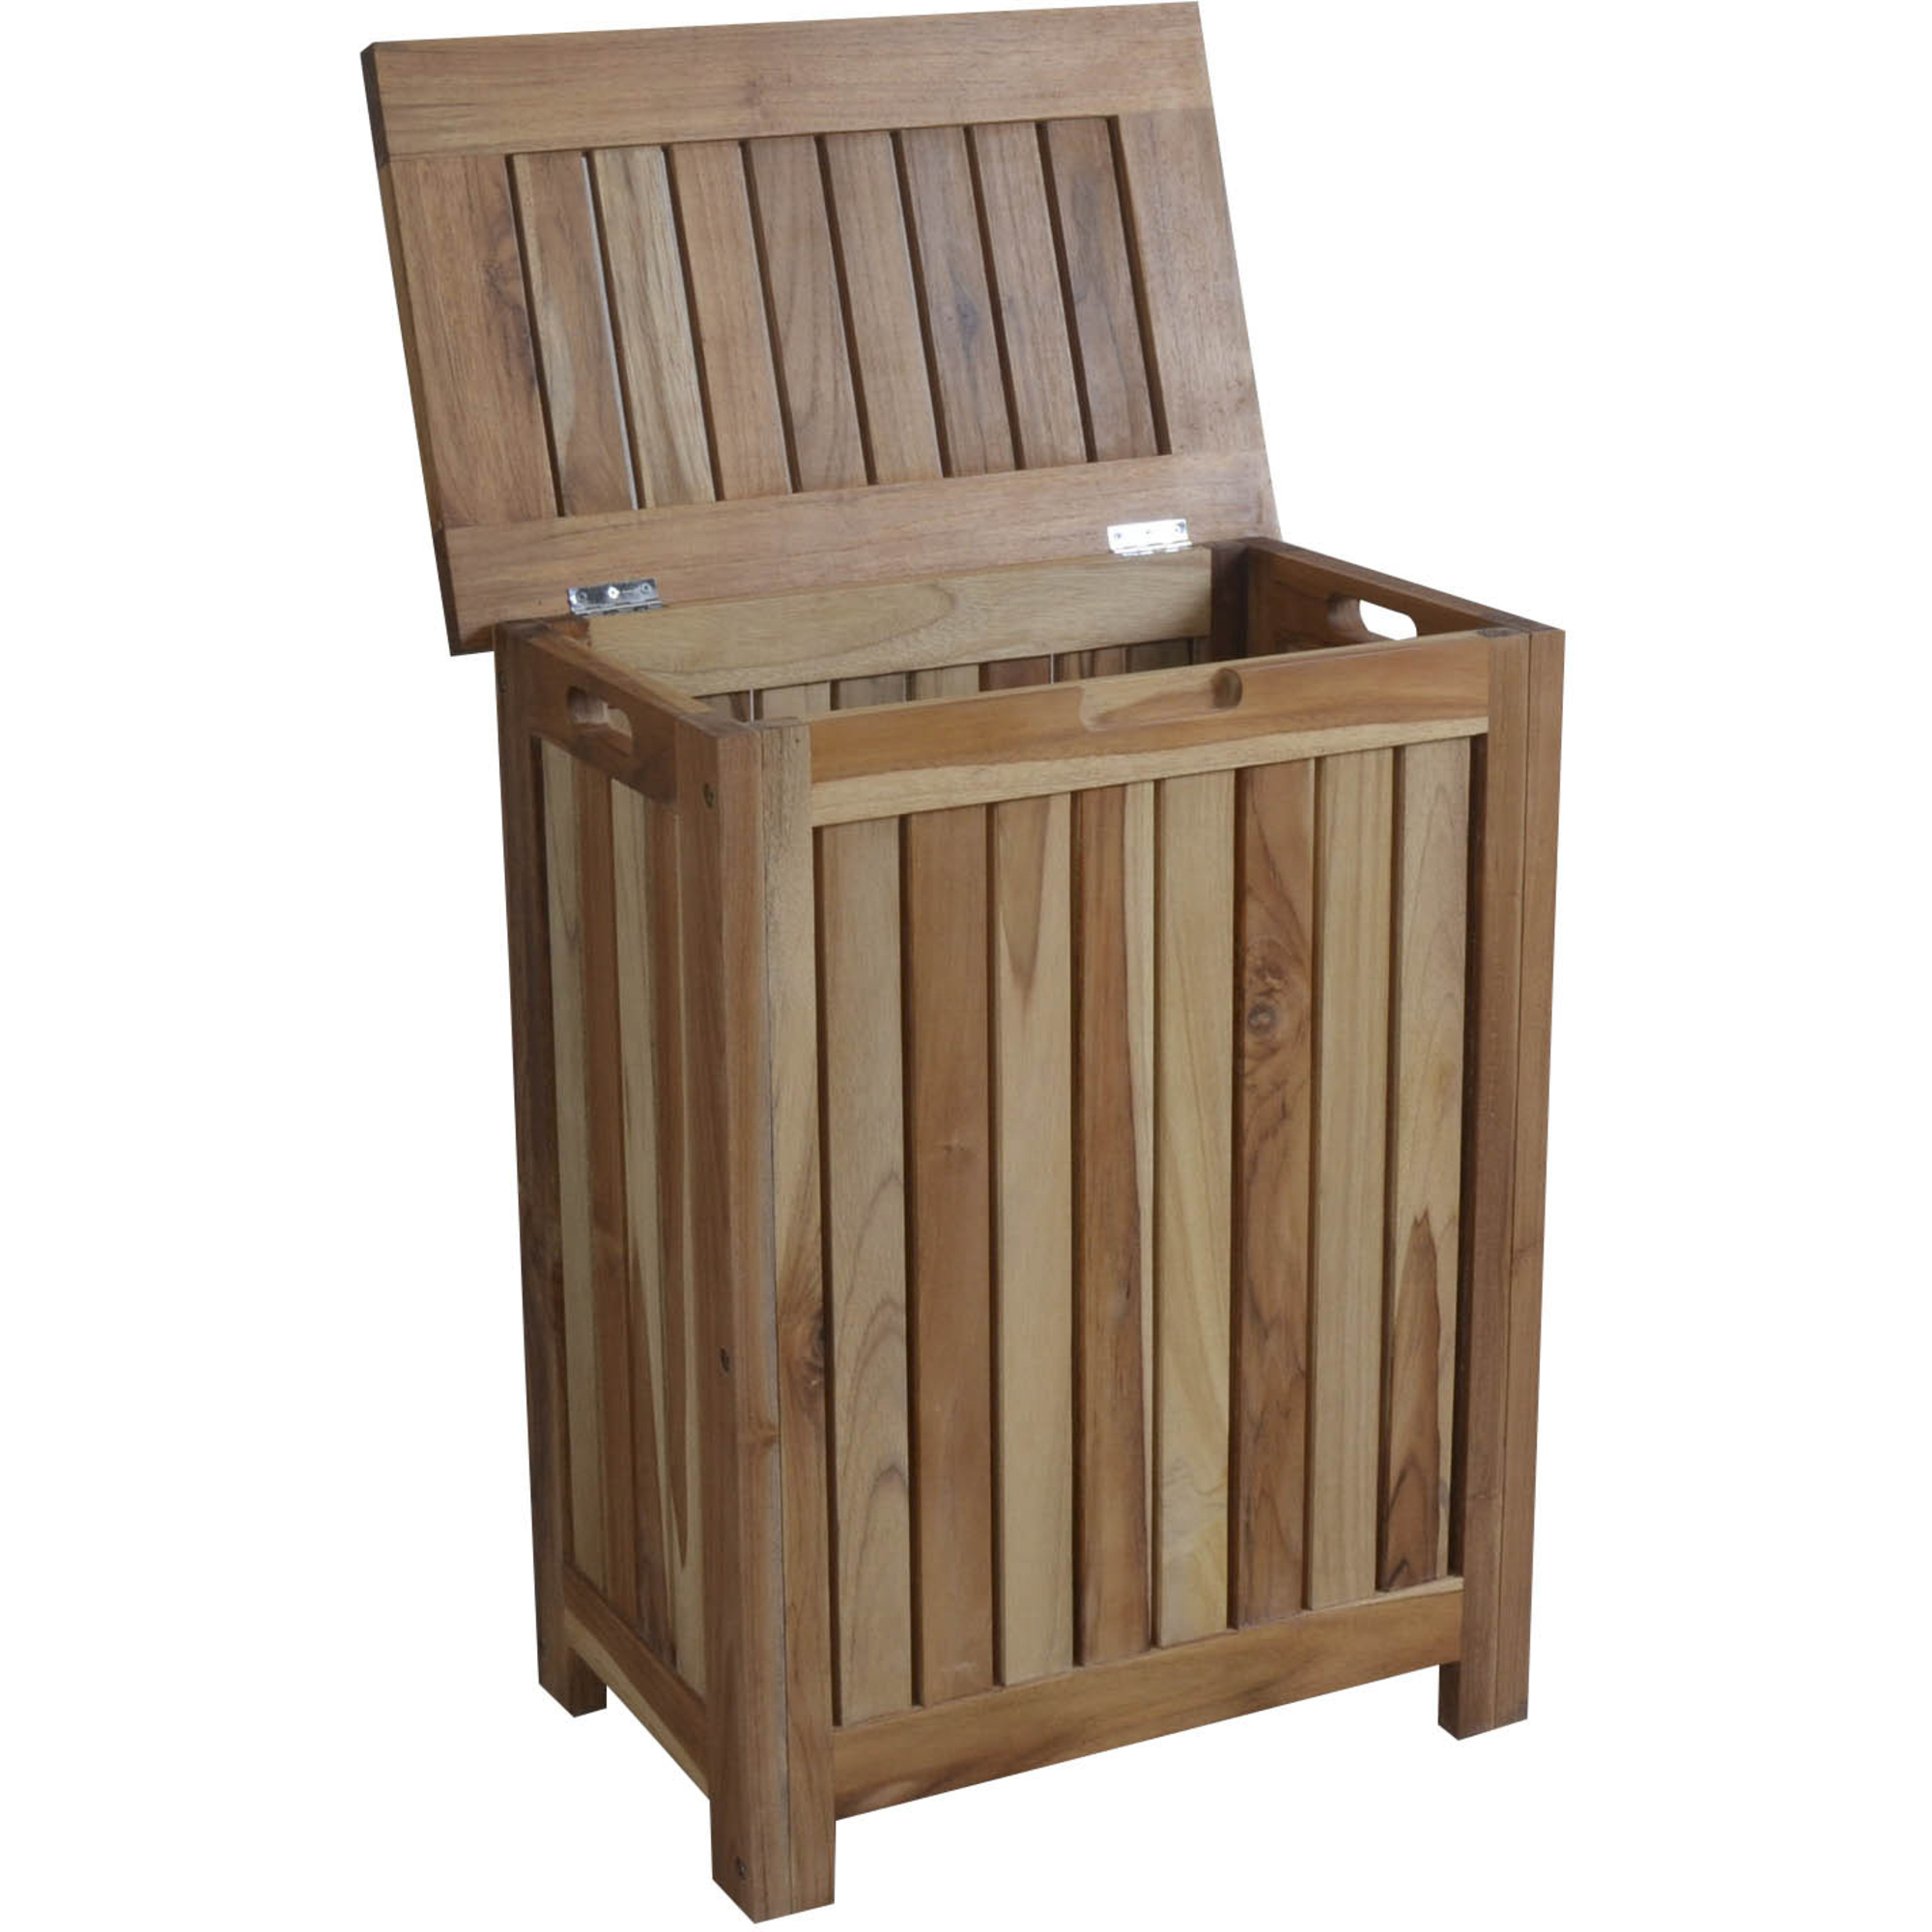 Compact Teak Laundy Storage with Removable Bag in Natural Finish